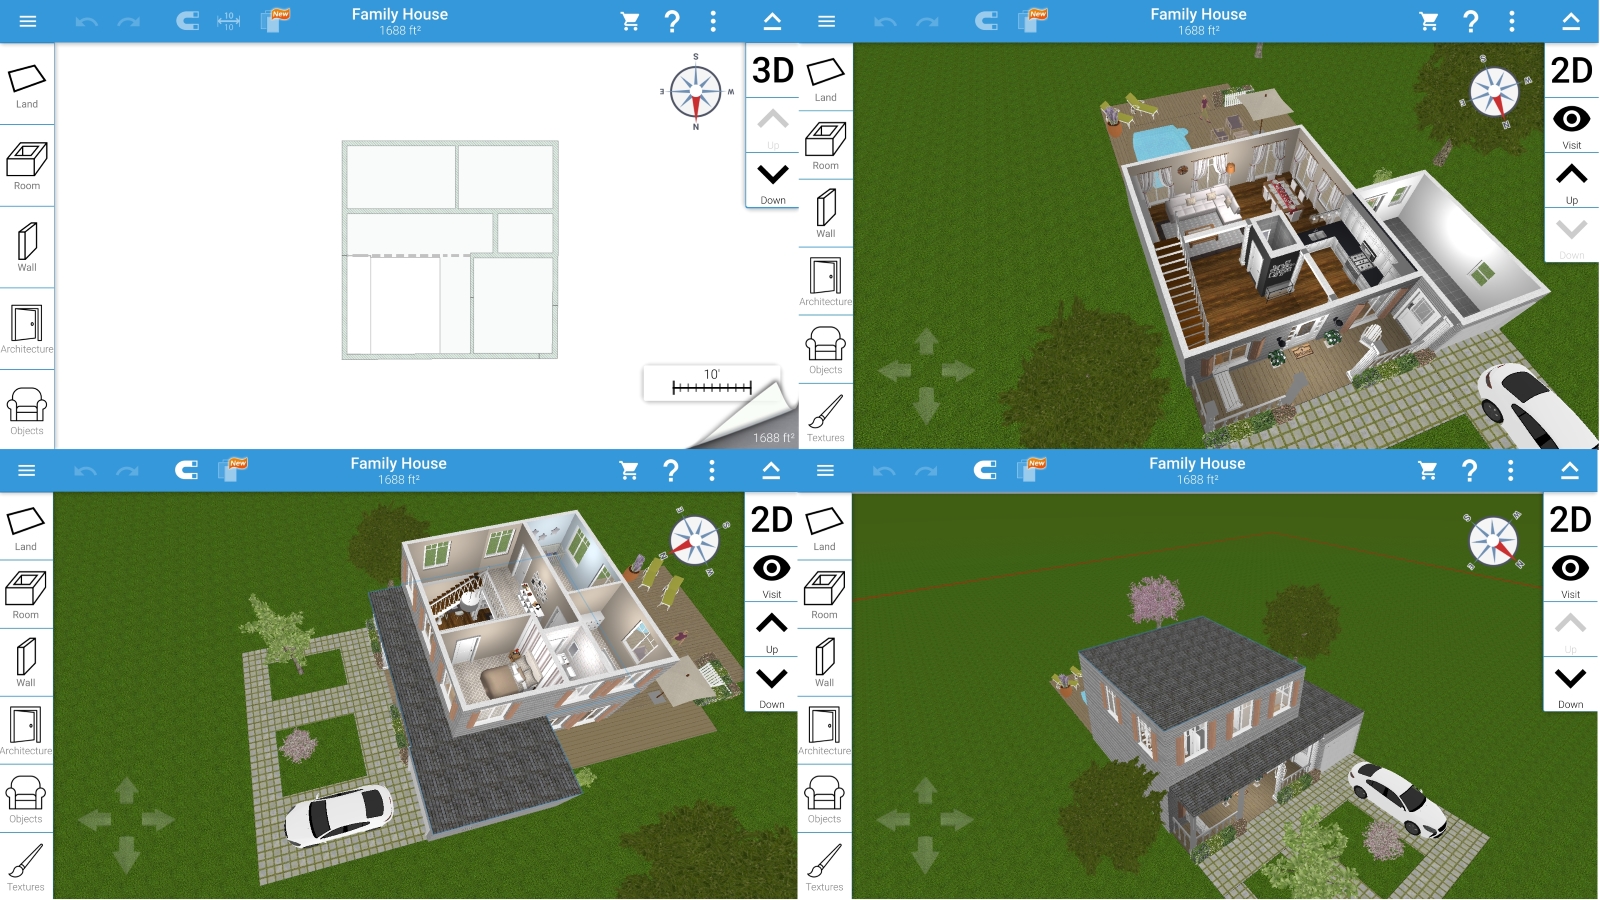 pasobsales.blogg.se - Free house plan drawing app